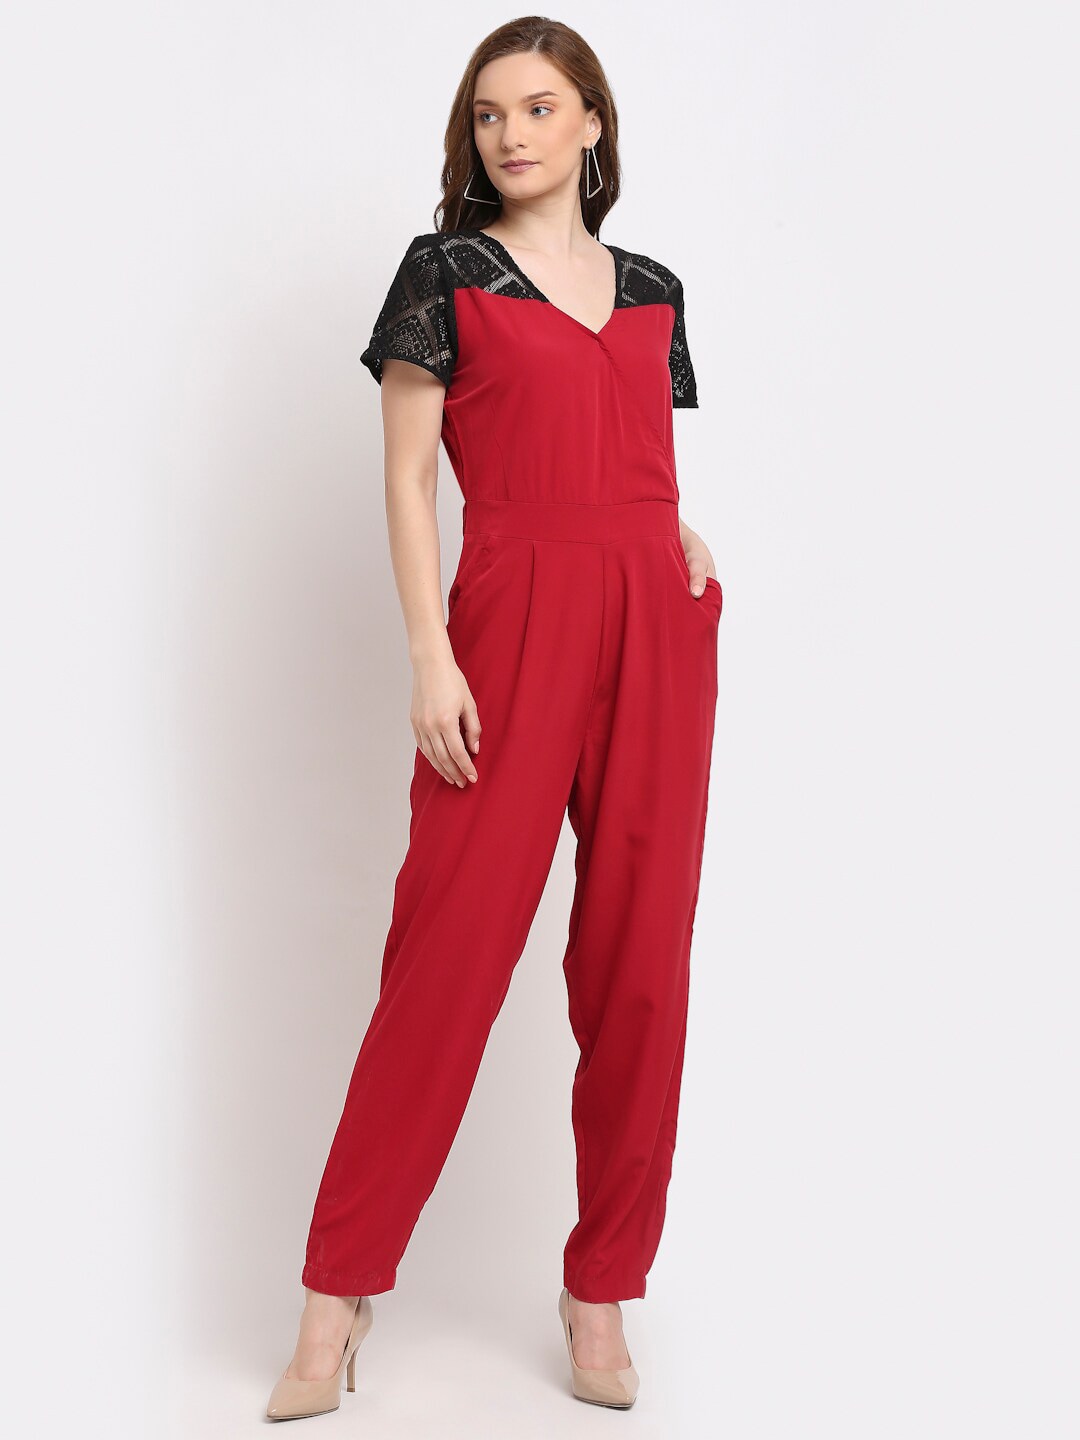 La Zoire Maroon & Black Basic Jumpsuit with Lace Inserts Price in India